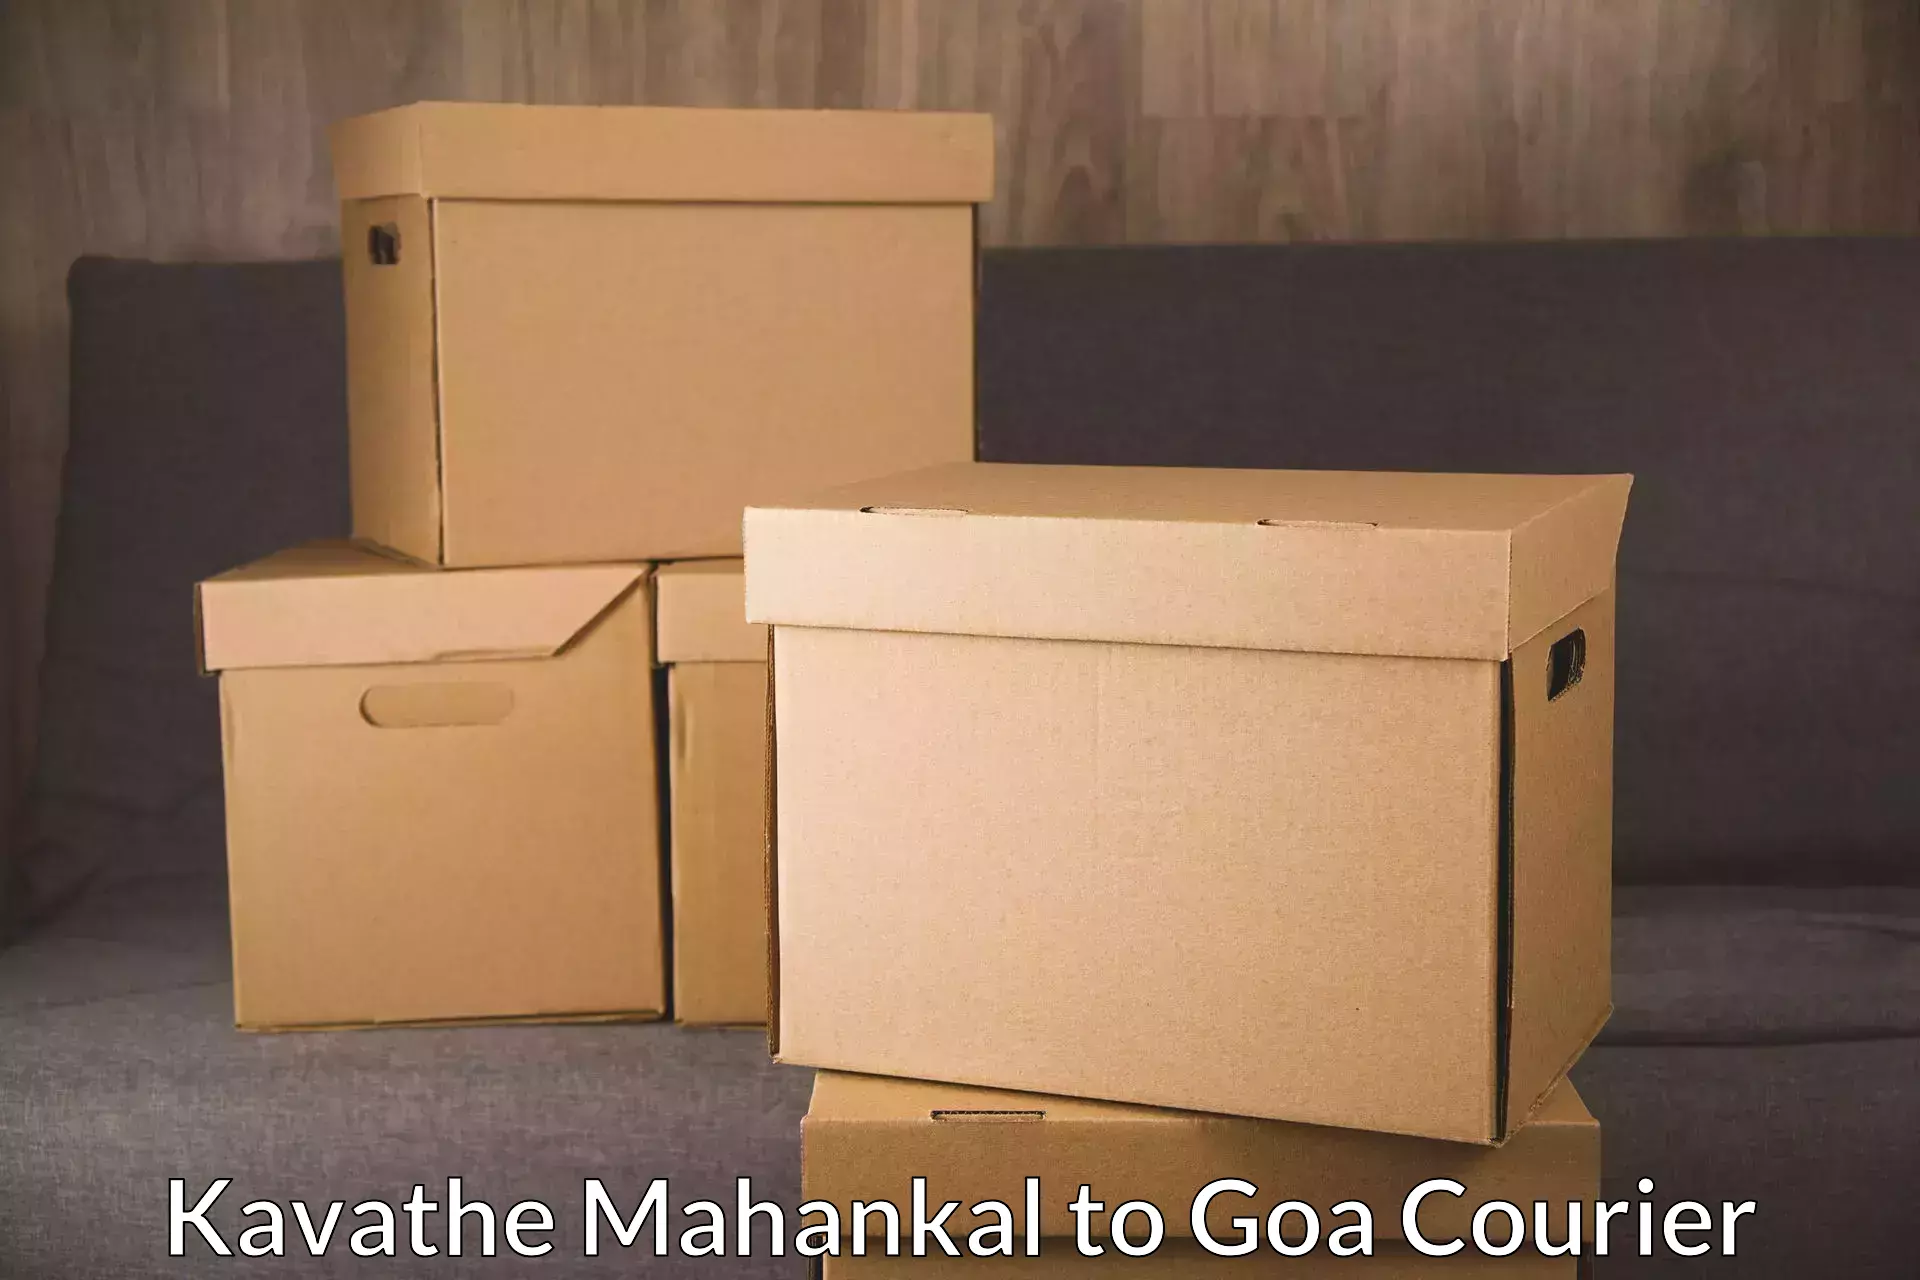 Multi-national courier services Kavathe Mahankal to South Goa